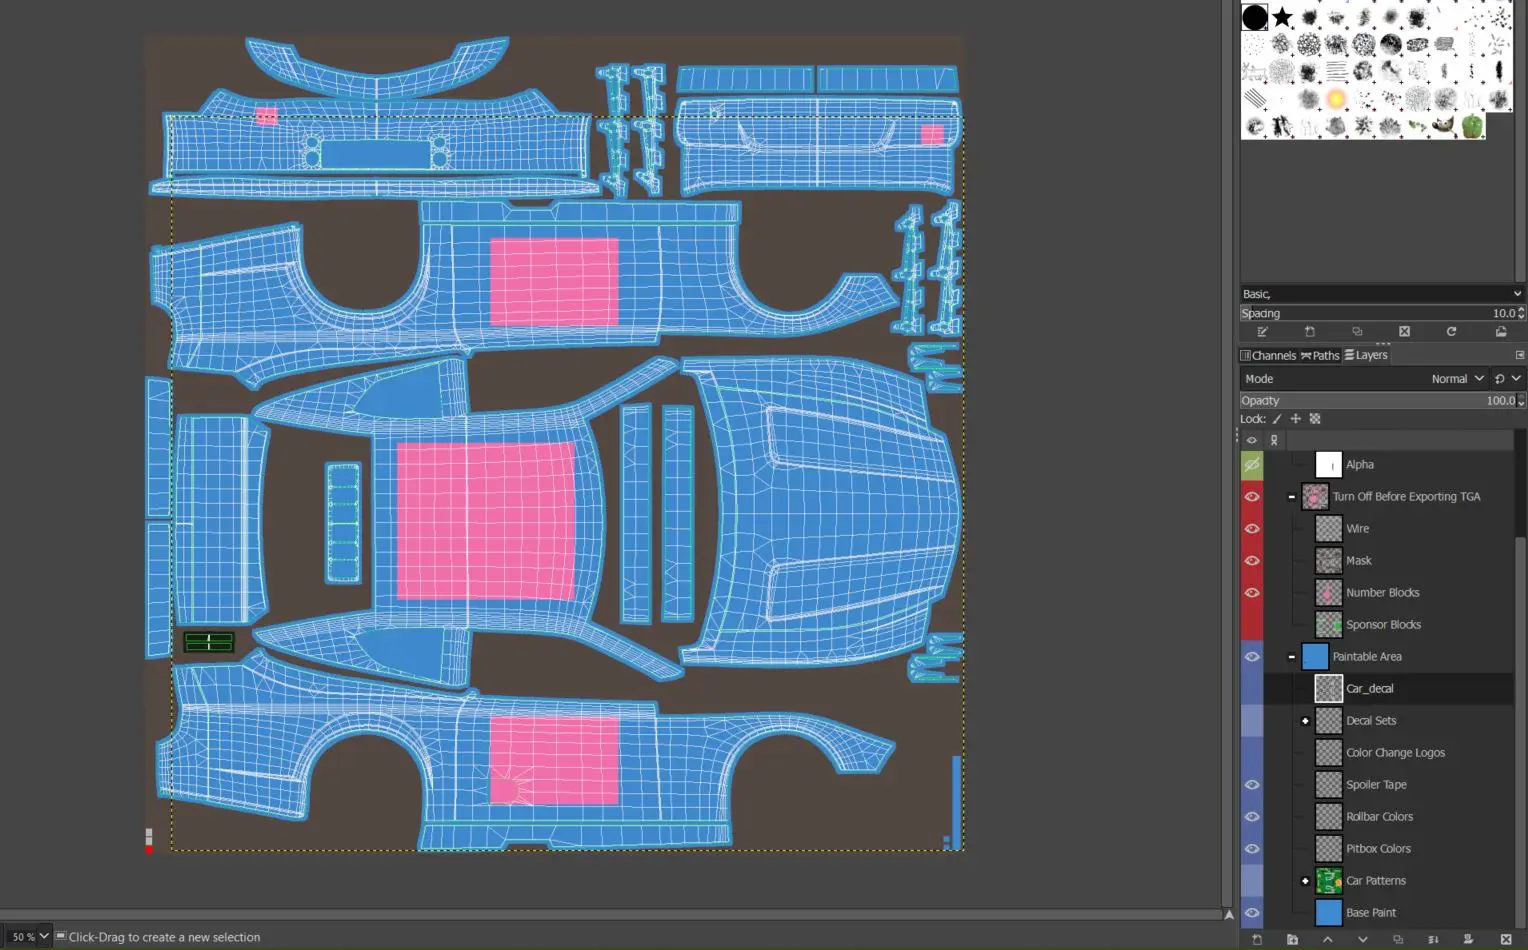 Our base livery with decals turned off, wireframe on, and number boxes (the big pink squares) enabled so we can see where iRacing will put the numbers.